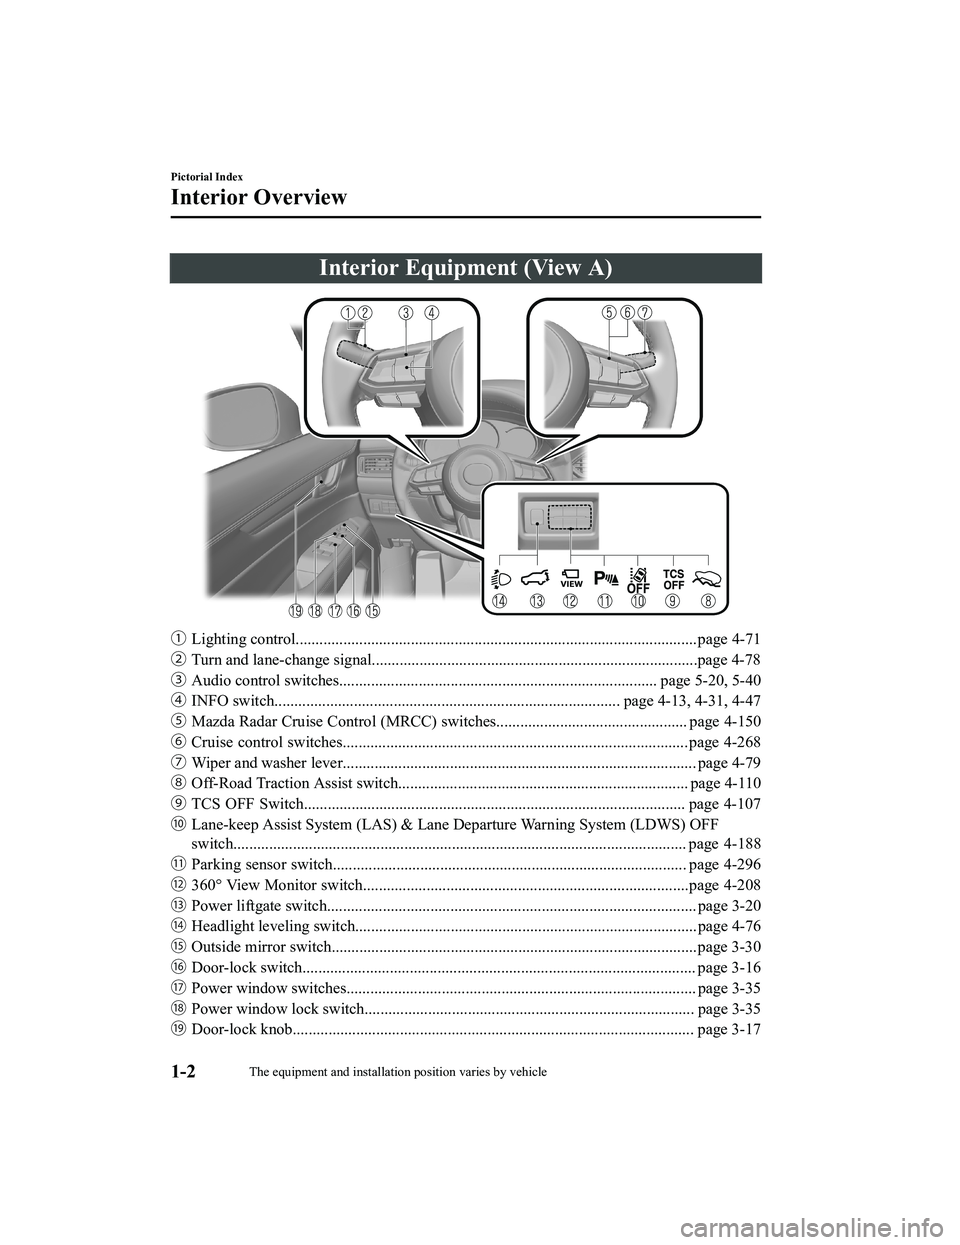 MAZDA MODEL CX-5 2022  Owners Manual Interior Equipment (View A)
ƒLighting control.....................................................................................................page 4-71
„ Turn and lane-change signal..........